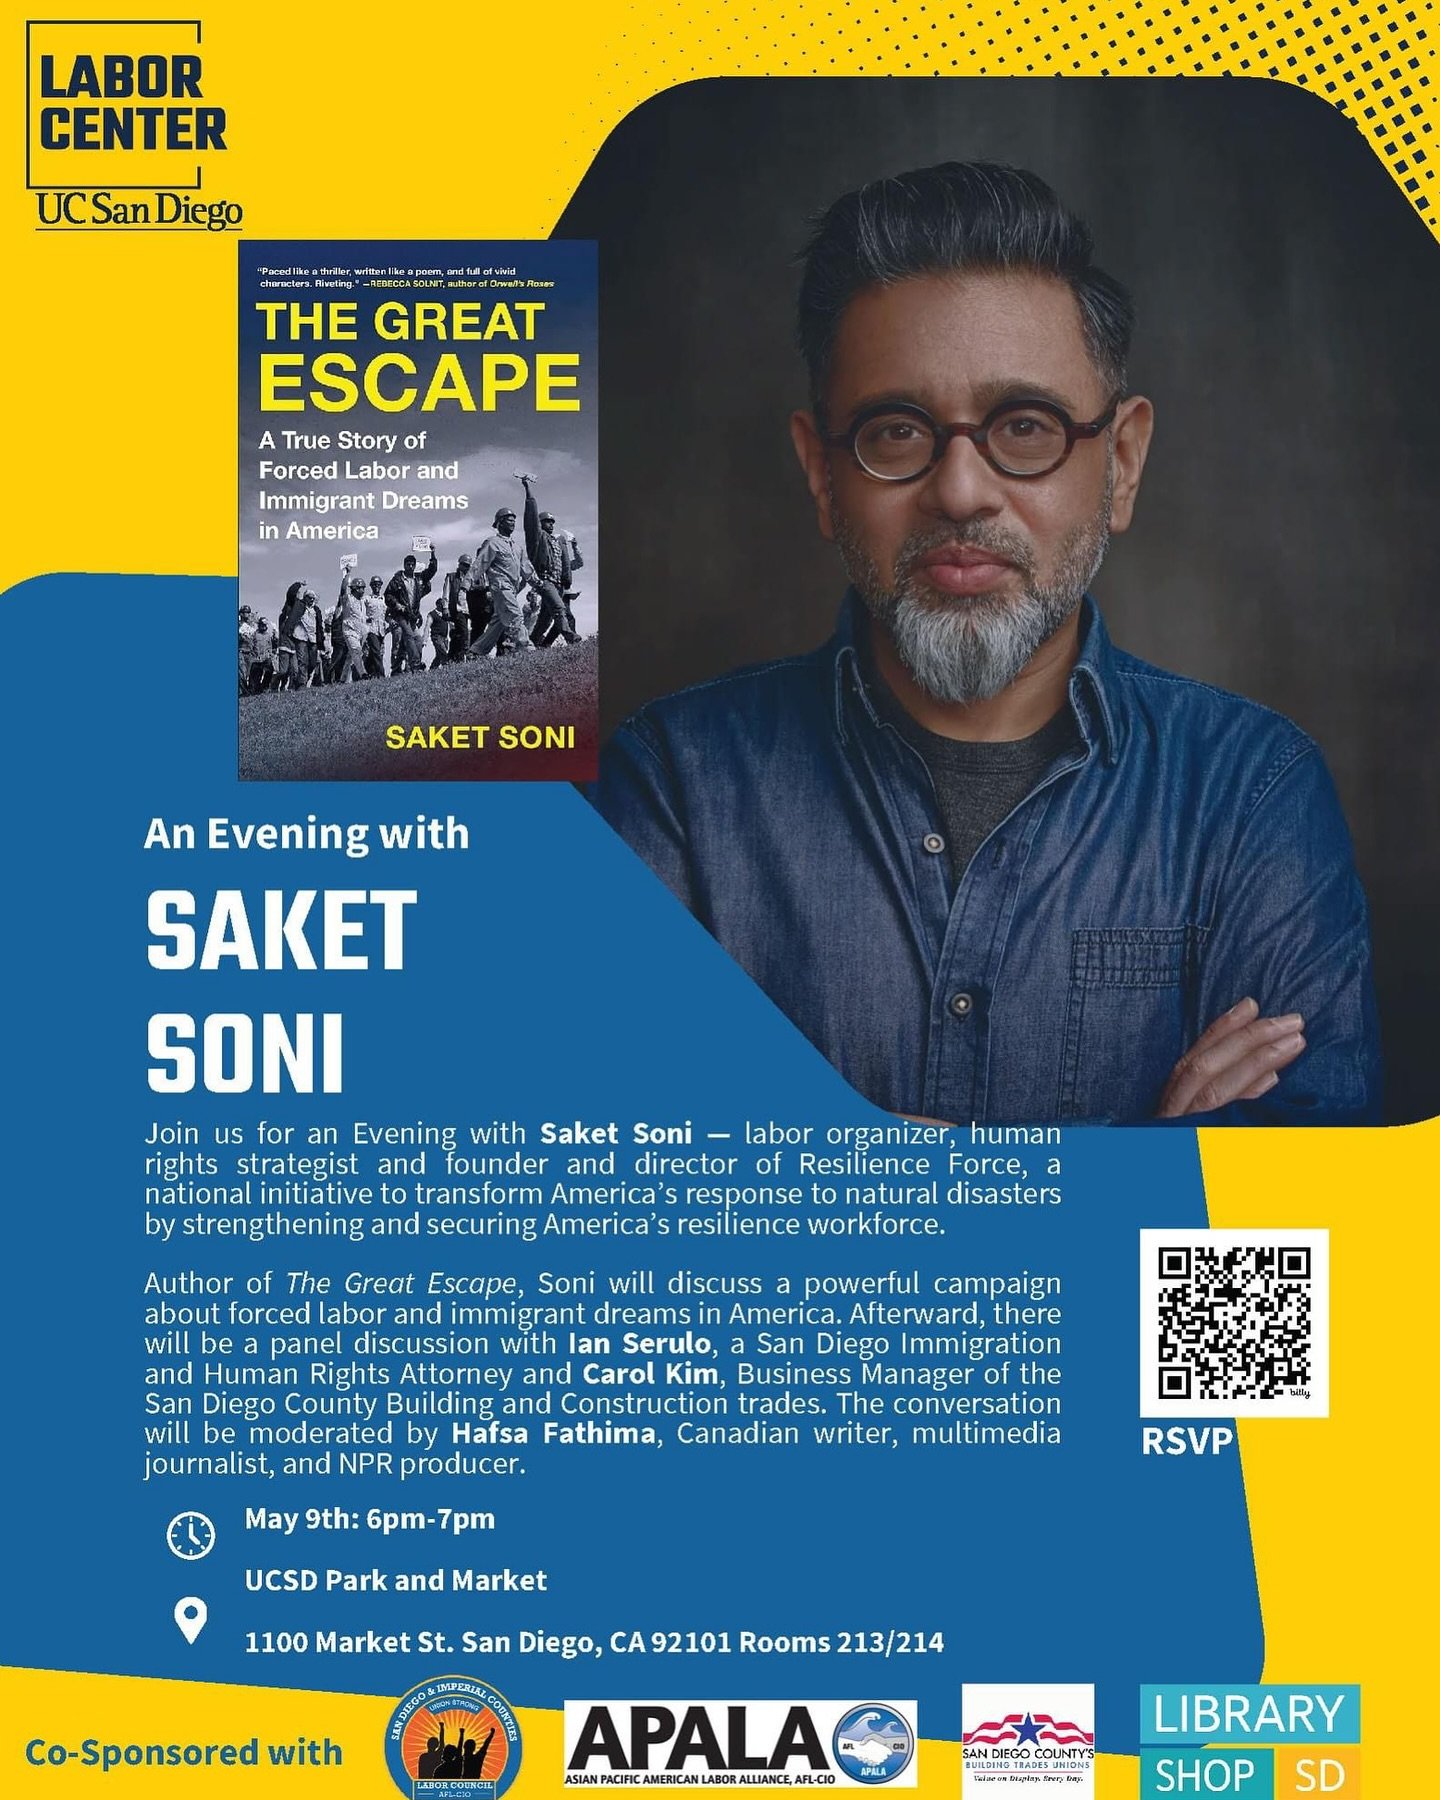 On May 9th, join us to meet author Saket Soni, a labor organizer and founder of Resilience Force, who will be discussing a campaign on forced labor and immigration dreams in America. Afterward, there will be a panel discussion featuring guest speaker